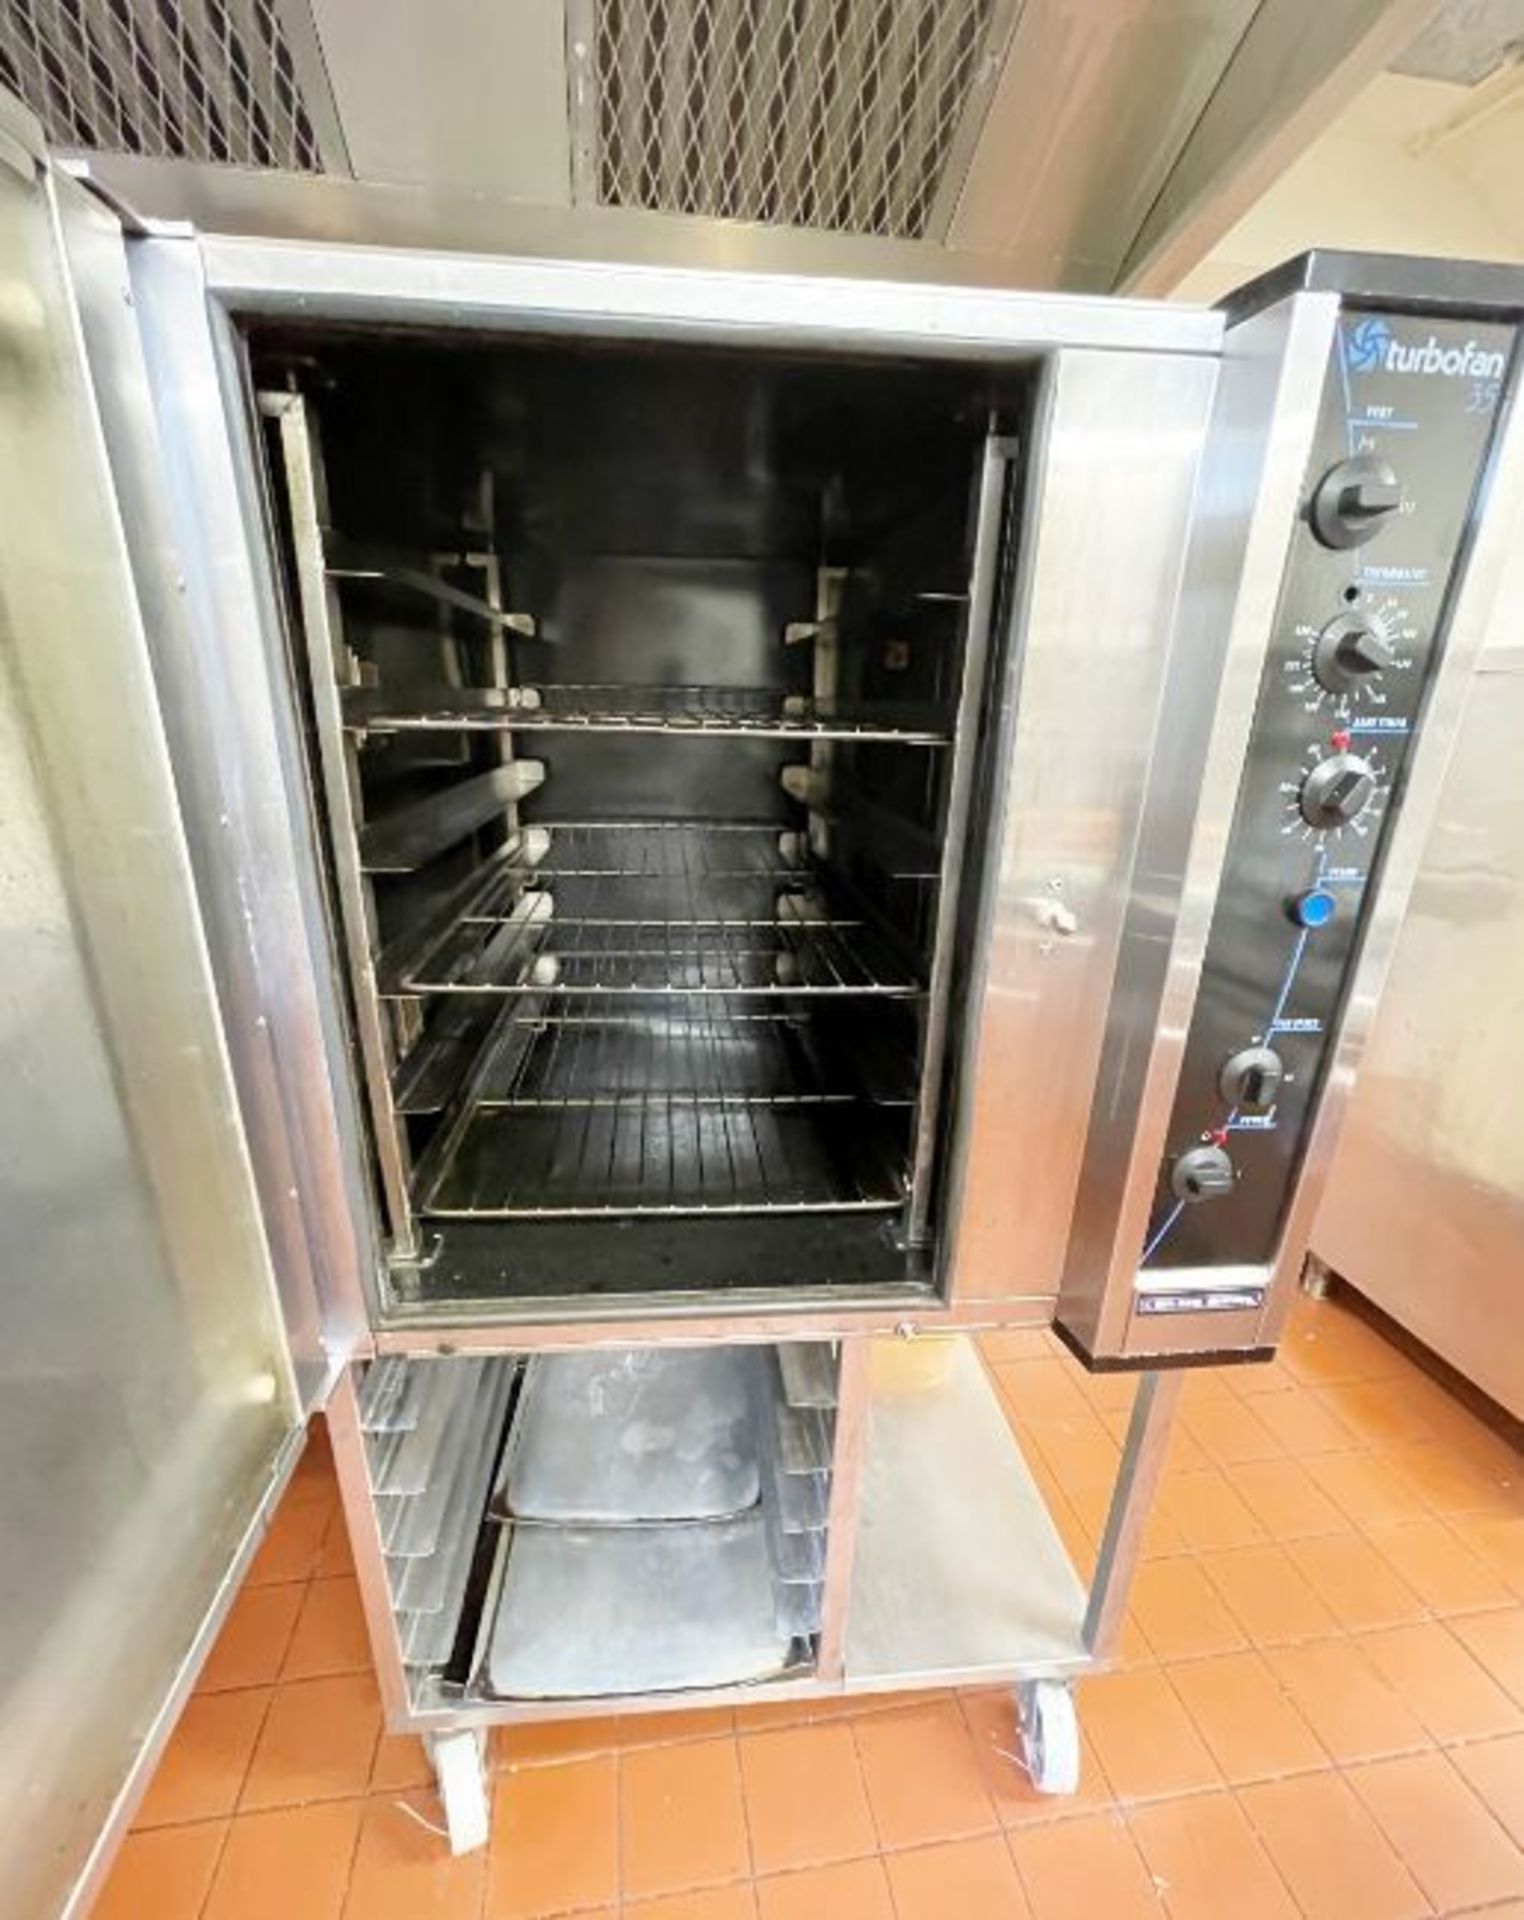 1 x Blue Seal Moffat Turbofan E35 Convection Oven With Stand - Model E35-30-453 - 400v Power - - Image 16 of 16